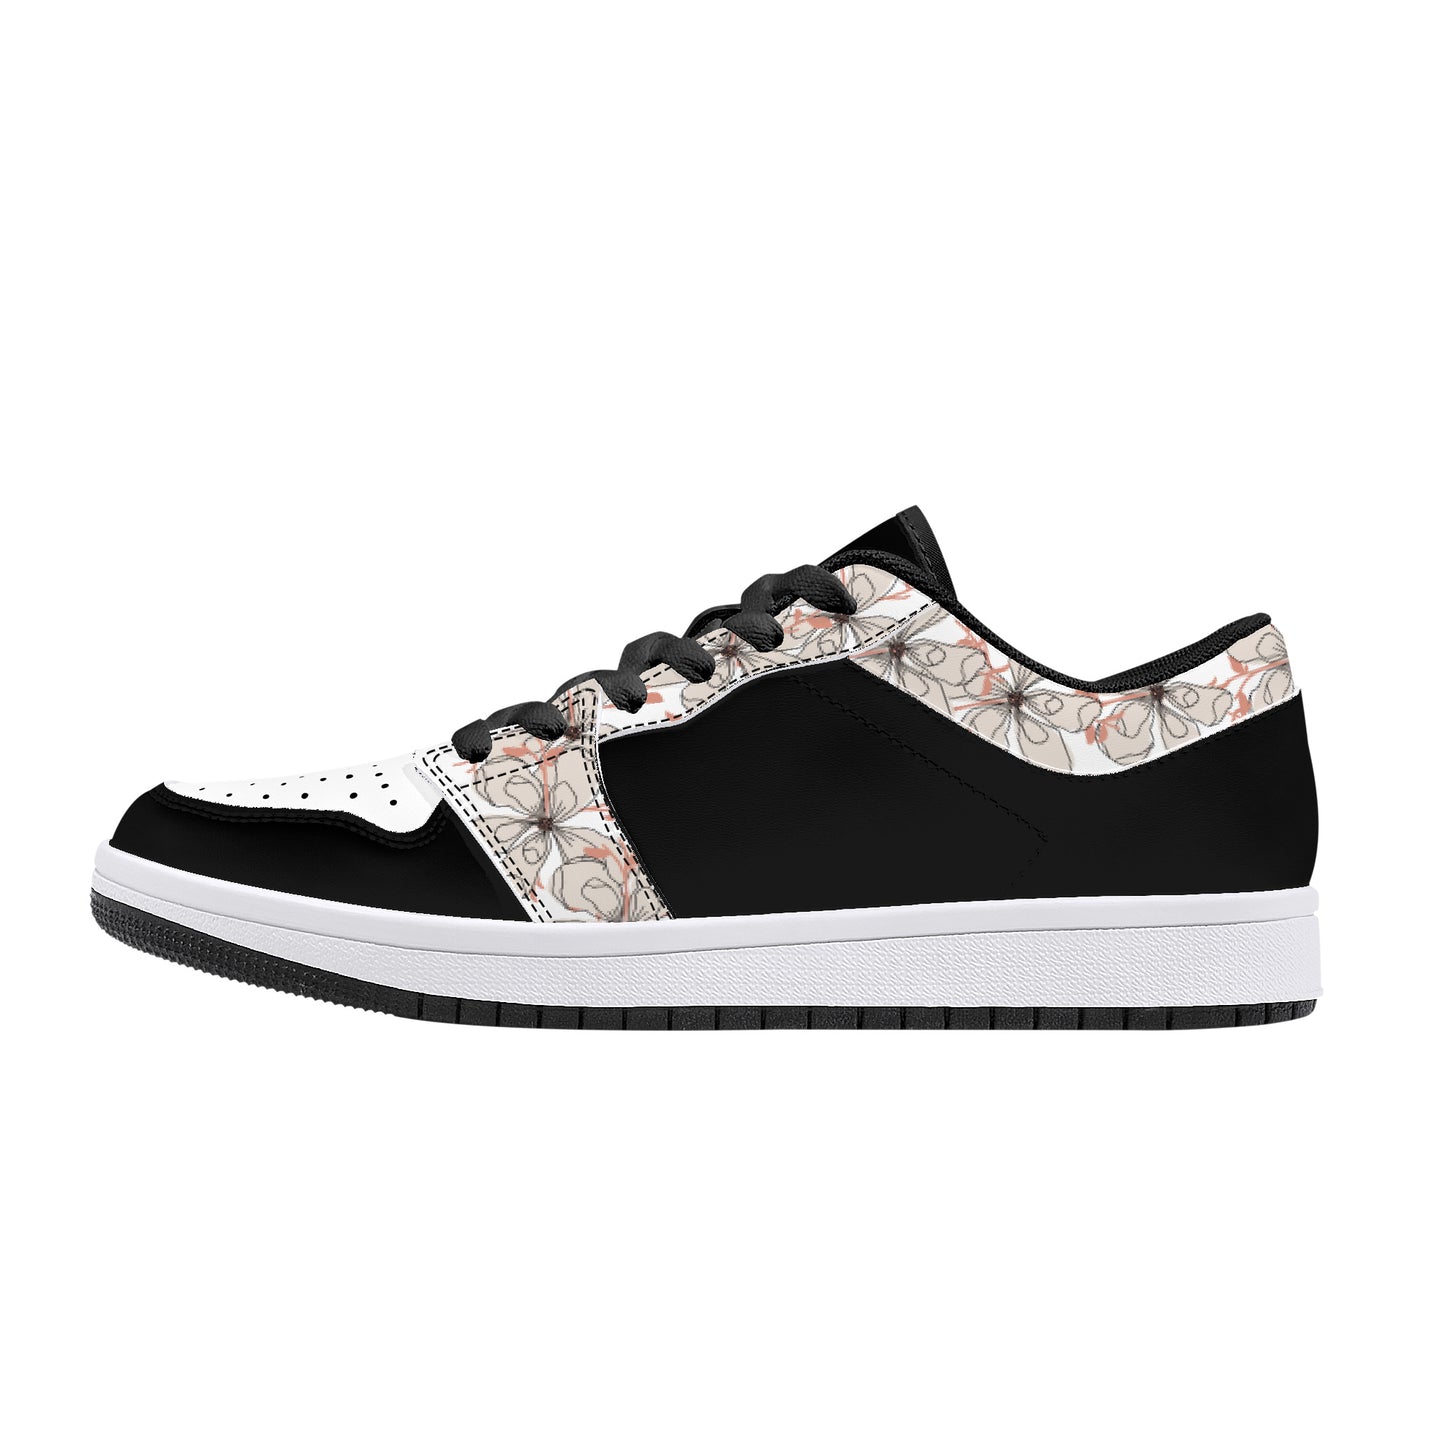 Leather Sneakers-Flower Trim-White Sole